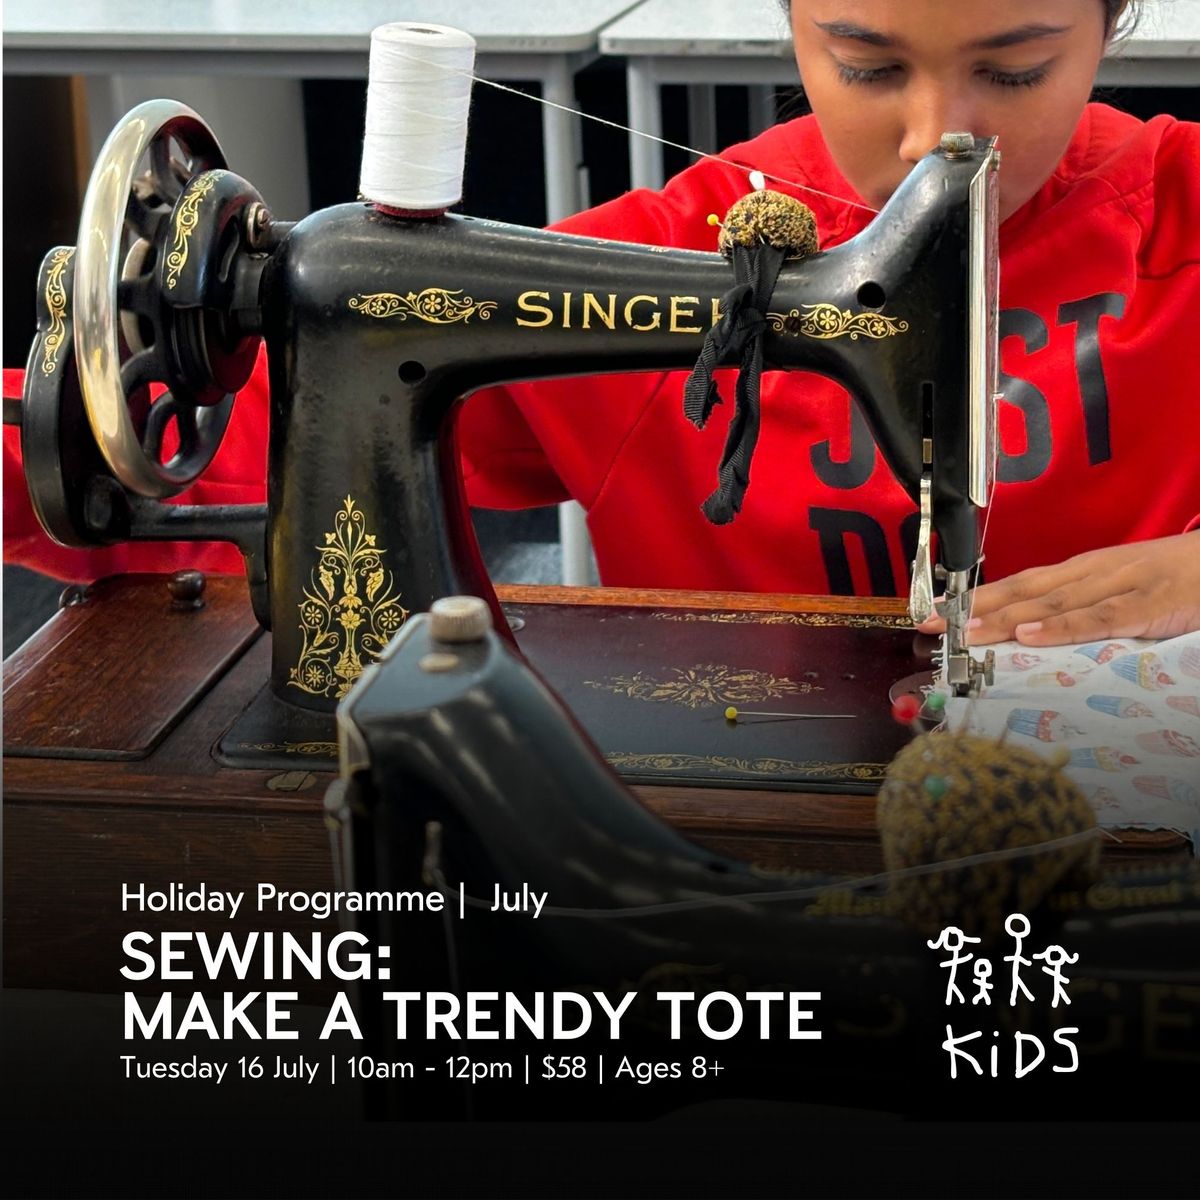 SEWING: Make a Trendy Tote | Holiday Programme @ UXBRIDGE